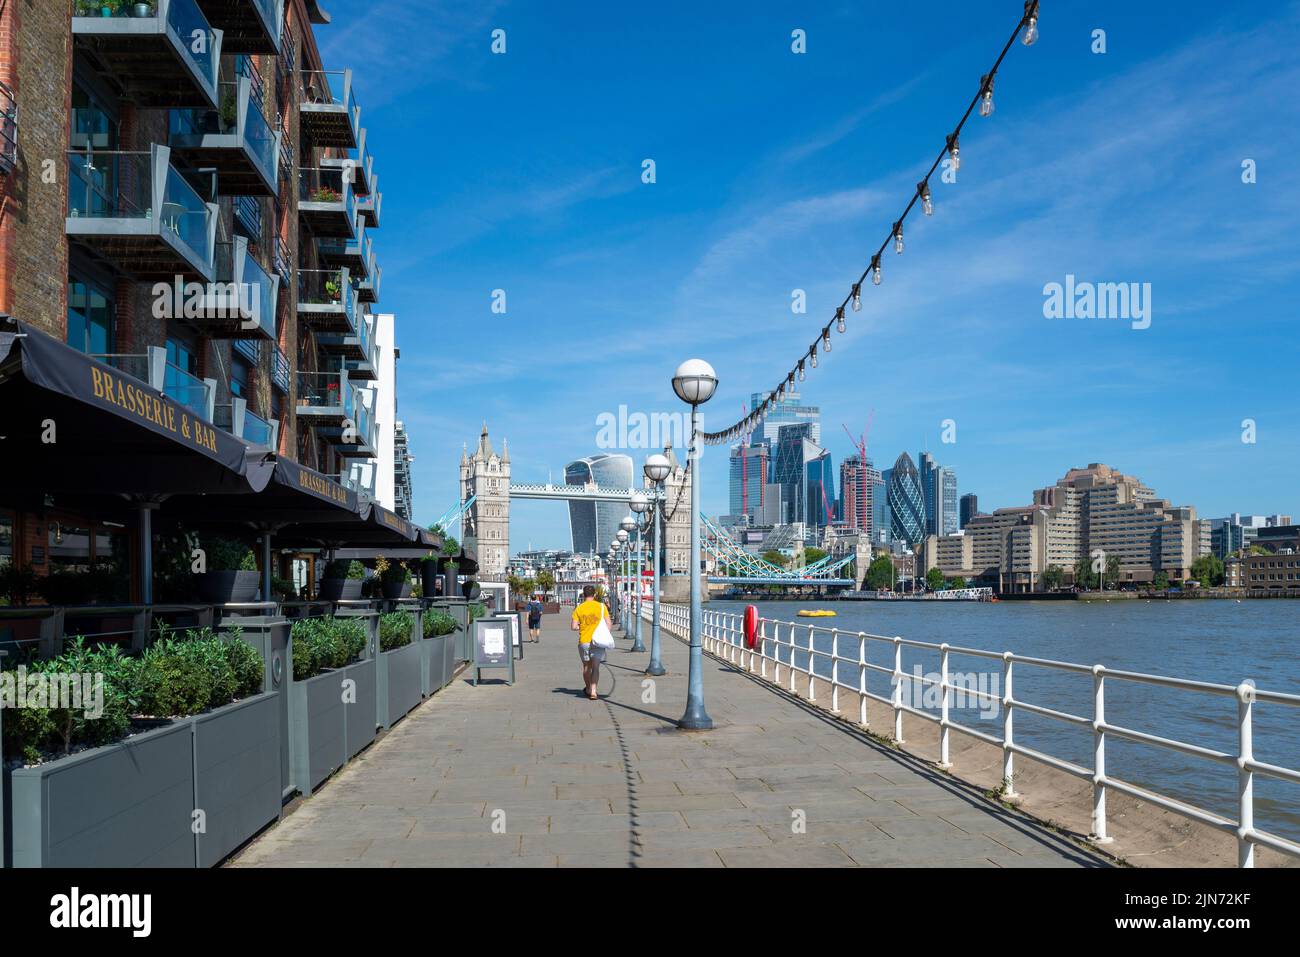 Thames Path and restaurants below Butler's Wharf, historic building at Shad Thames on south bank of the River Thames, near London's Tower Bridge. Stock Photo